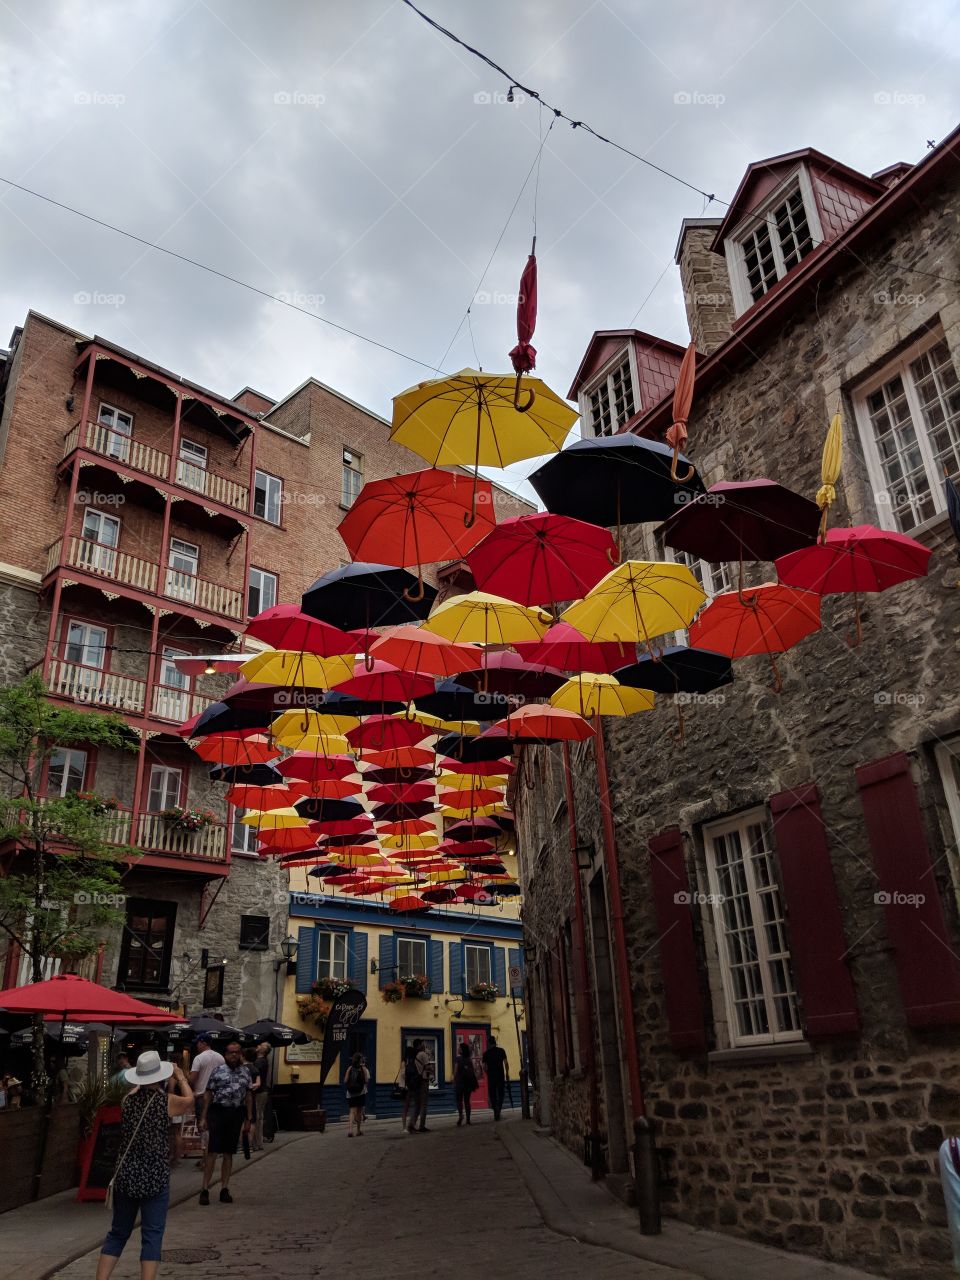 Umbrellas in Old Town